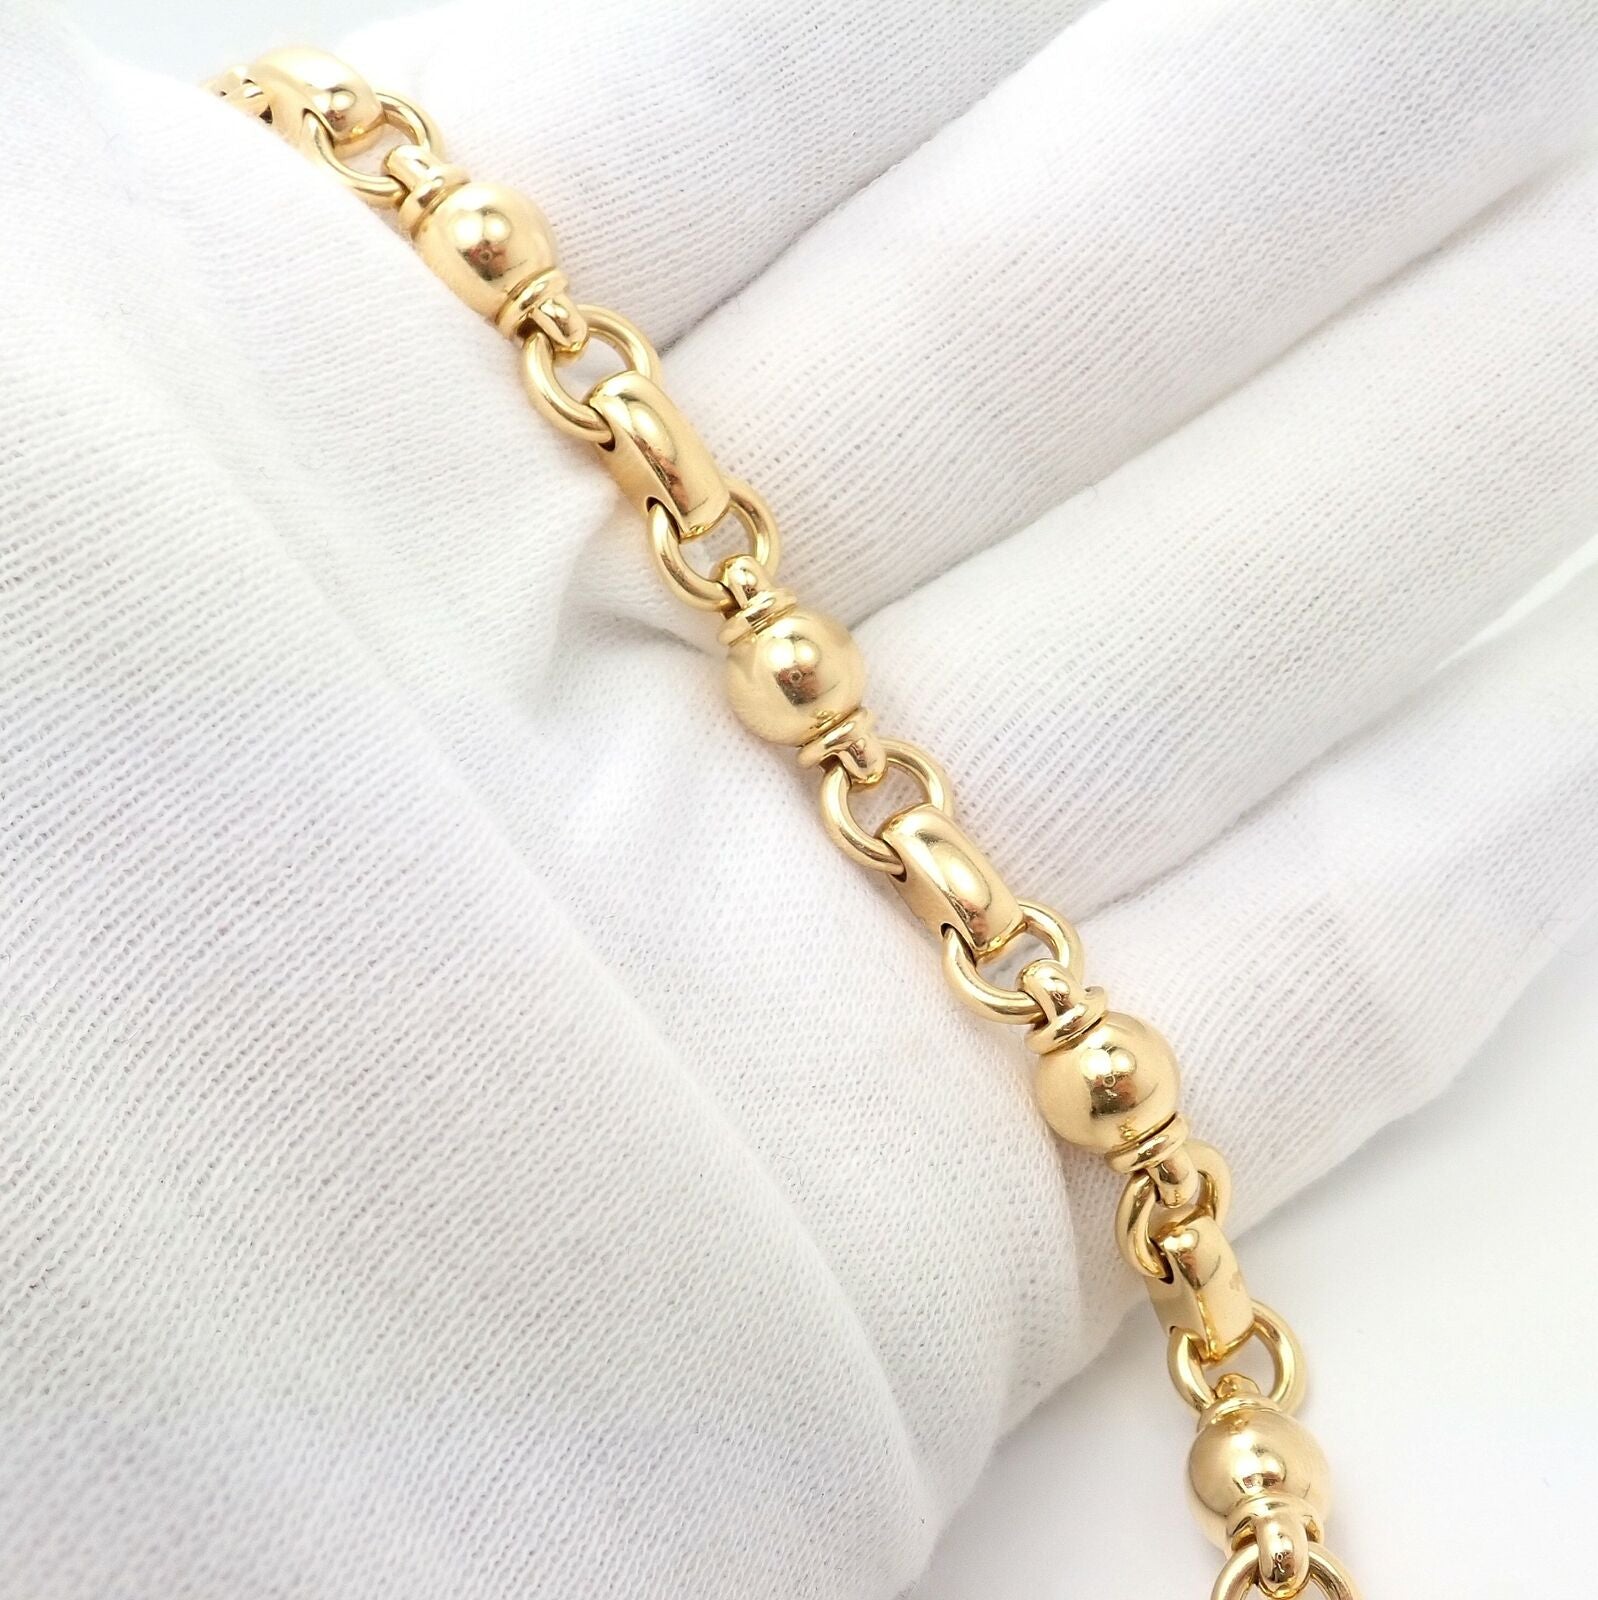 CHANEL PreOwned 2020s 18kt Yellow Gold Coco Crush Bracelet  Farfetch